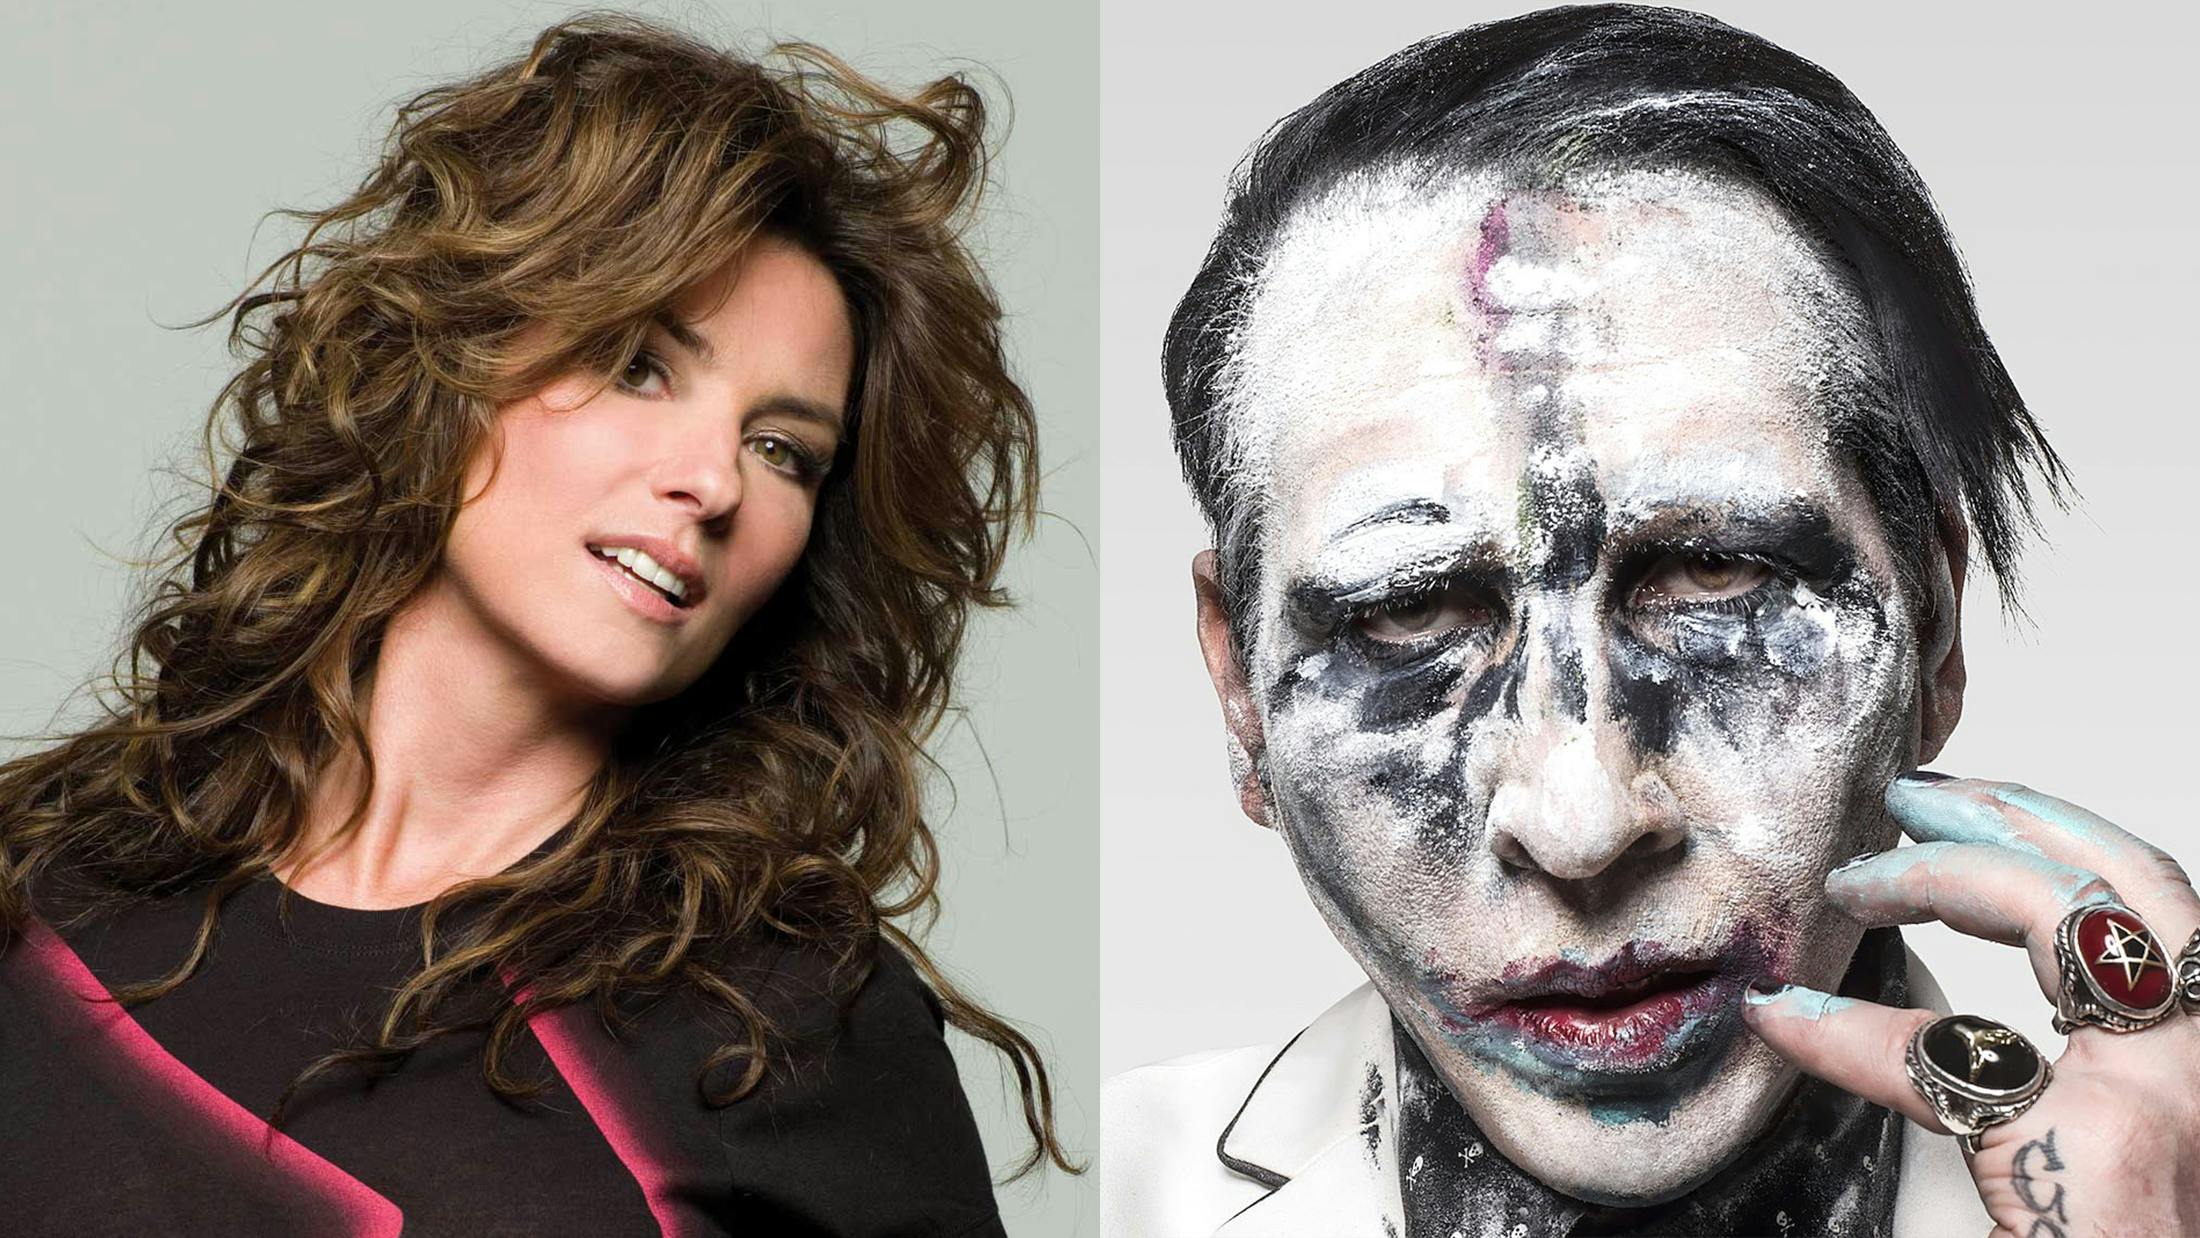 Check Out Shania Twain And Marilyn Manson Performing Together On Man I Feel Beautiful